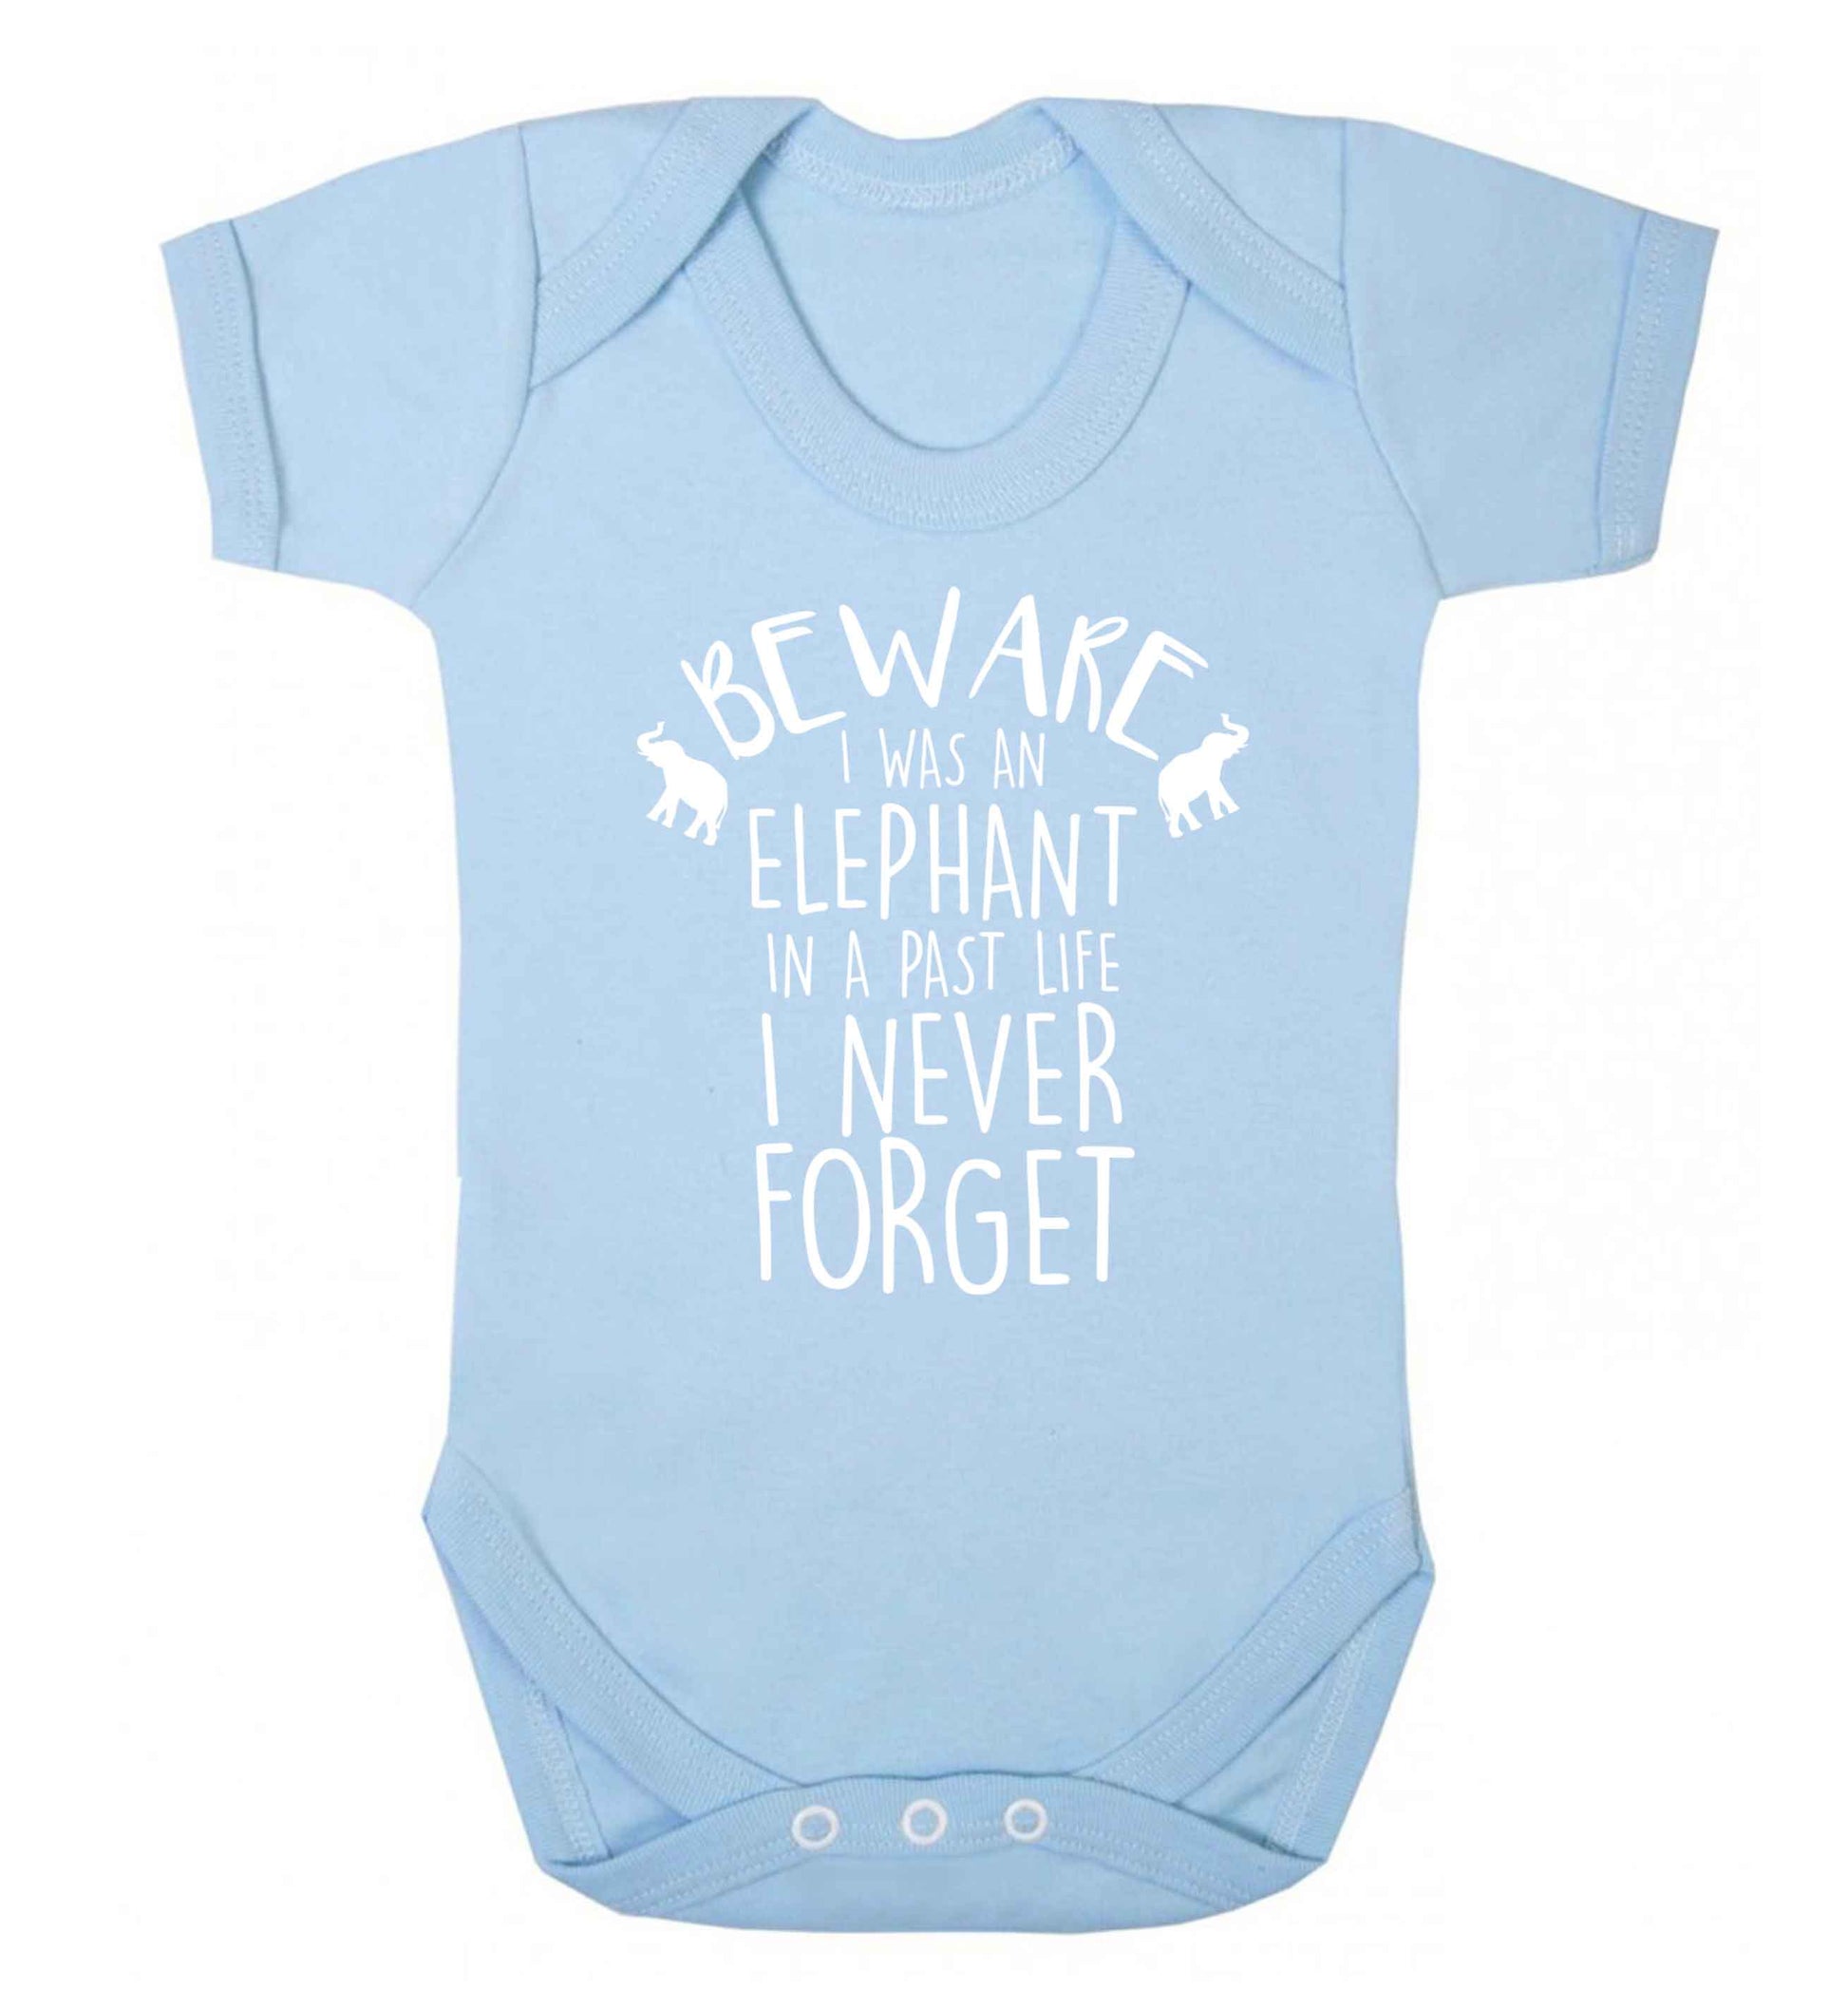 Beware I was an elephant in my past life I never forget Baby Vest pale blue 18-24 months